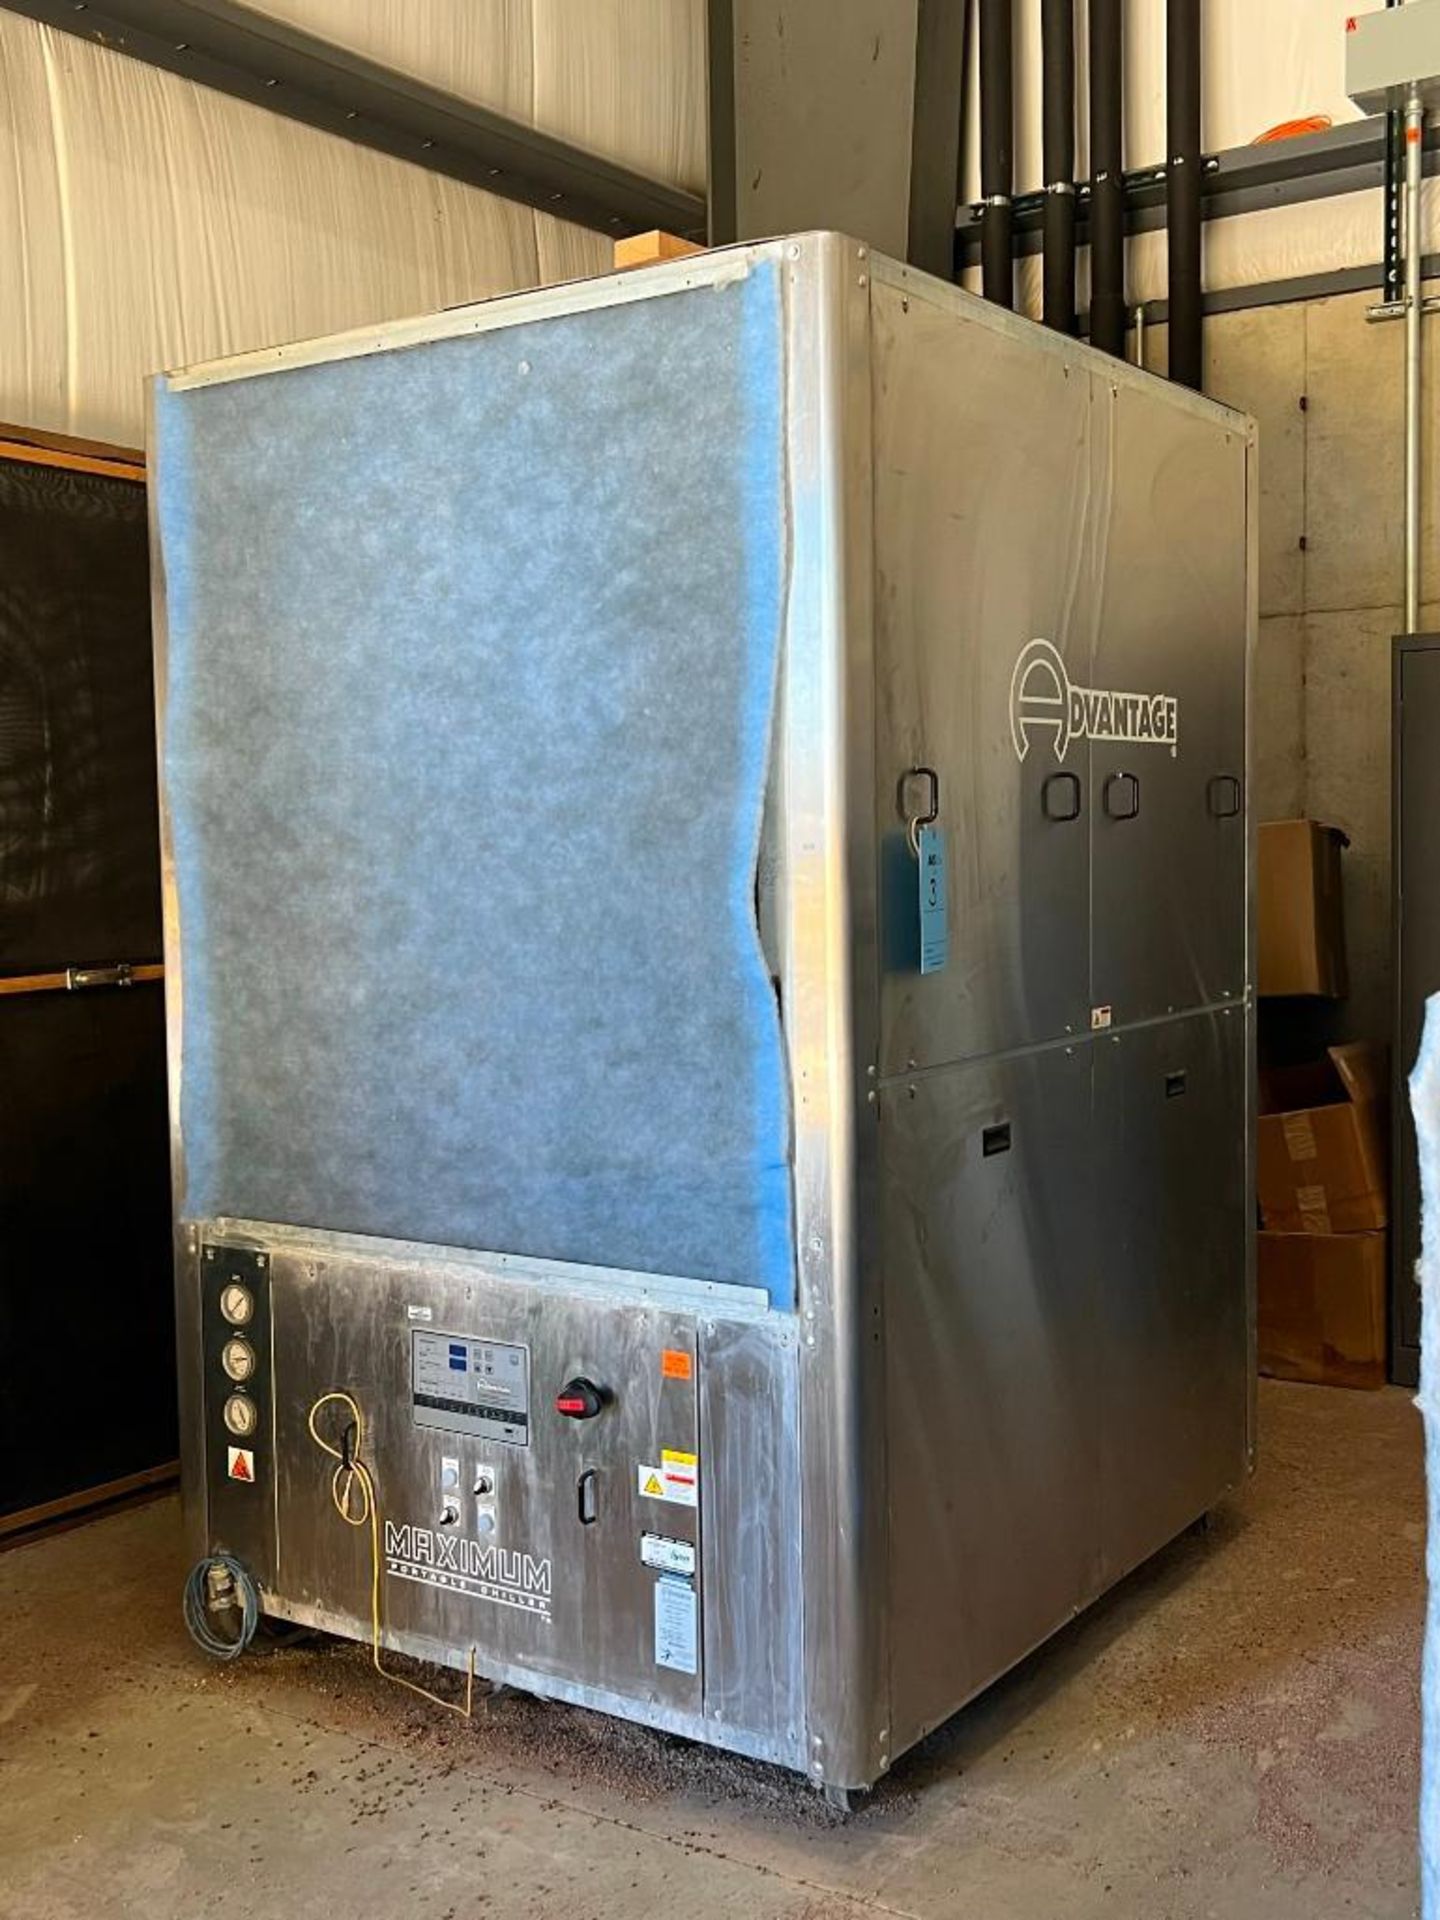 Advantage 30-Ton Maximum Series Portable Chiller Model M1-30AB-MZCD, S/N 153415 (2018), with Spare F - Image 3 of 8